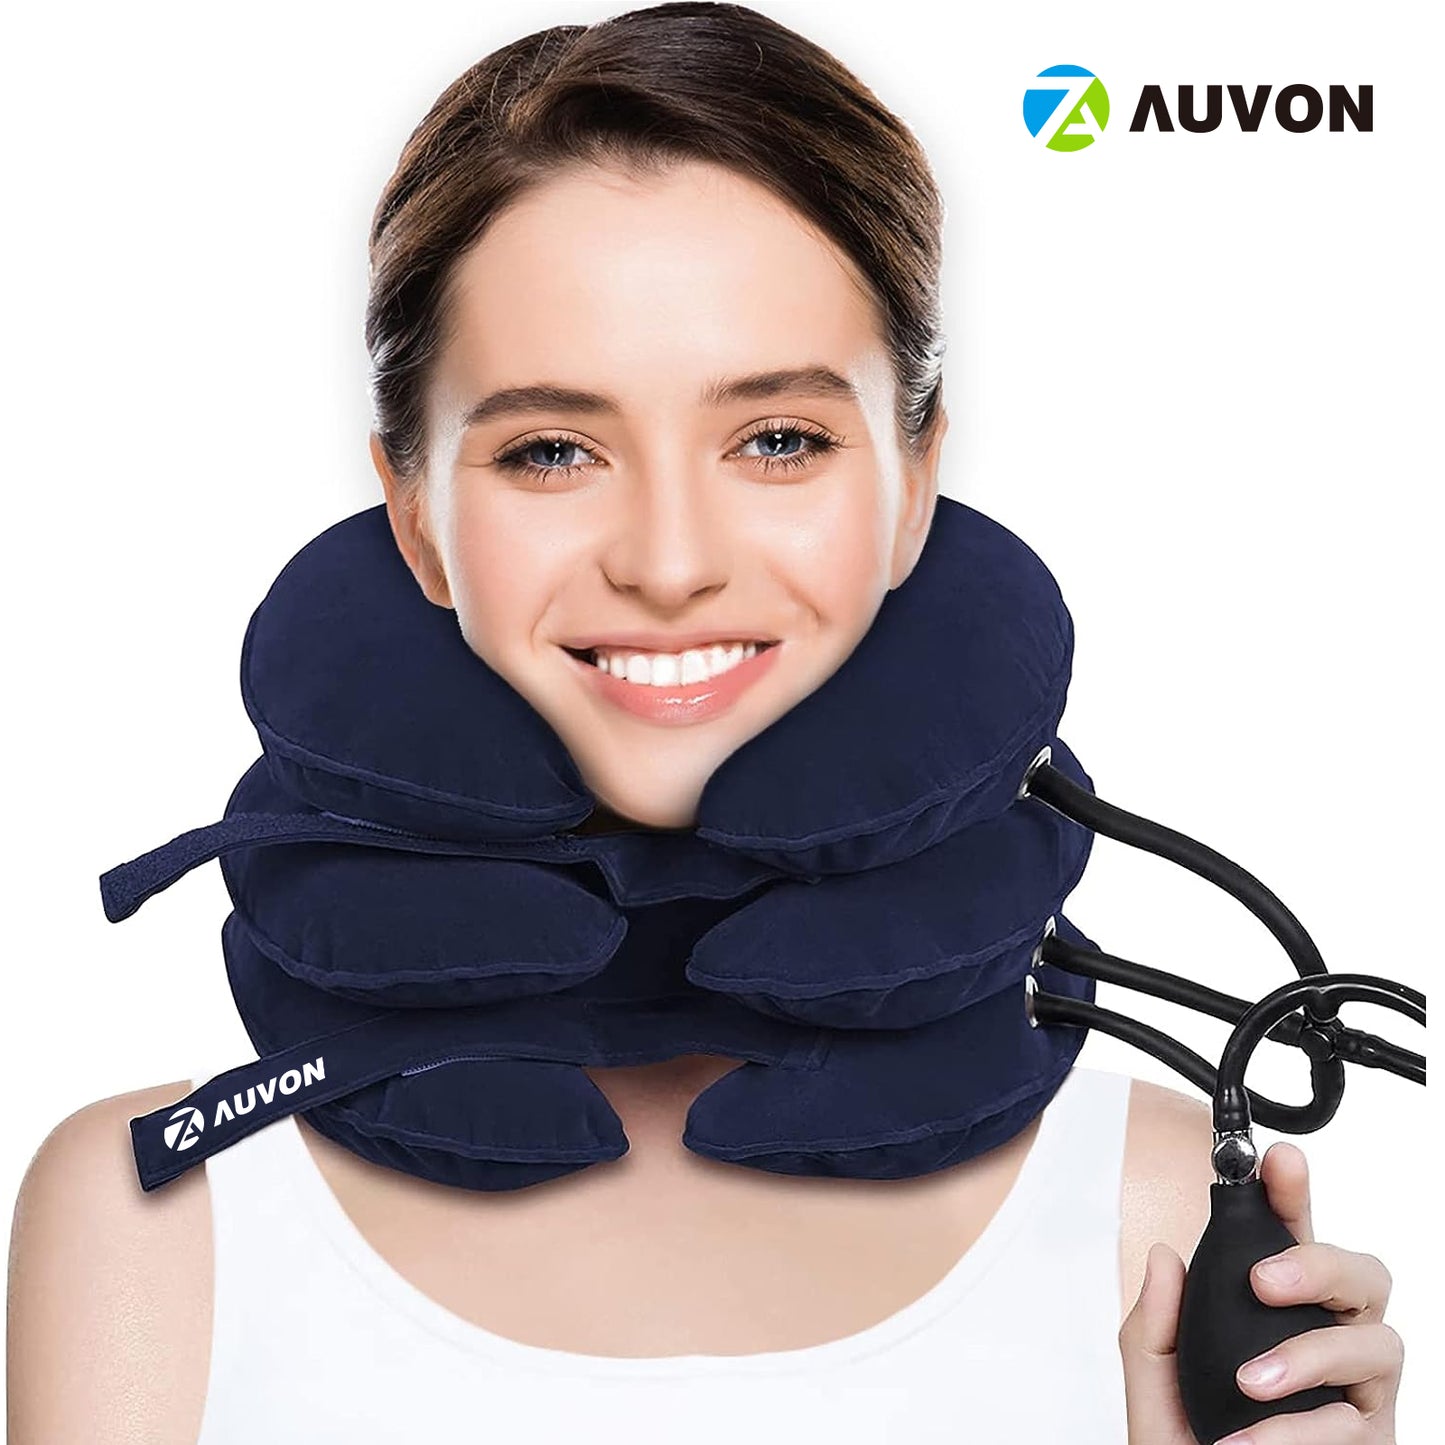 AUVON Inflatable Neck Support Cushions for Neck Pain Relief, Adjustabl